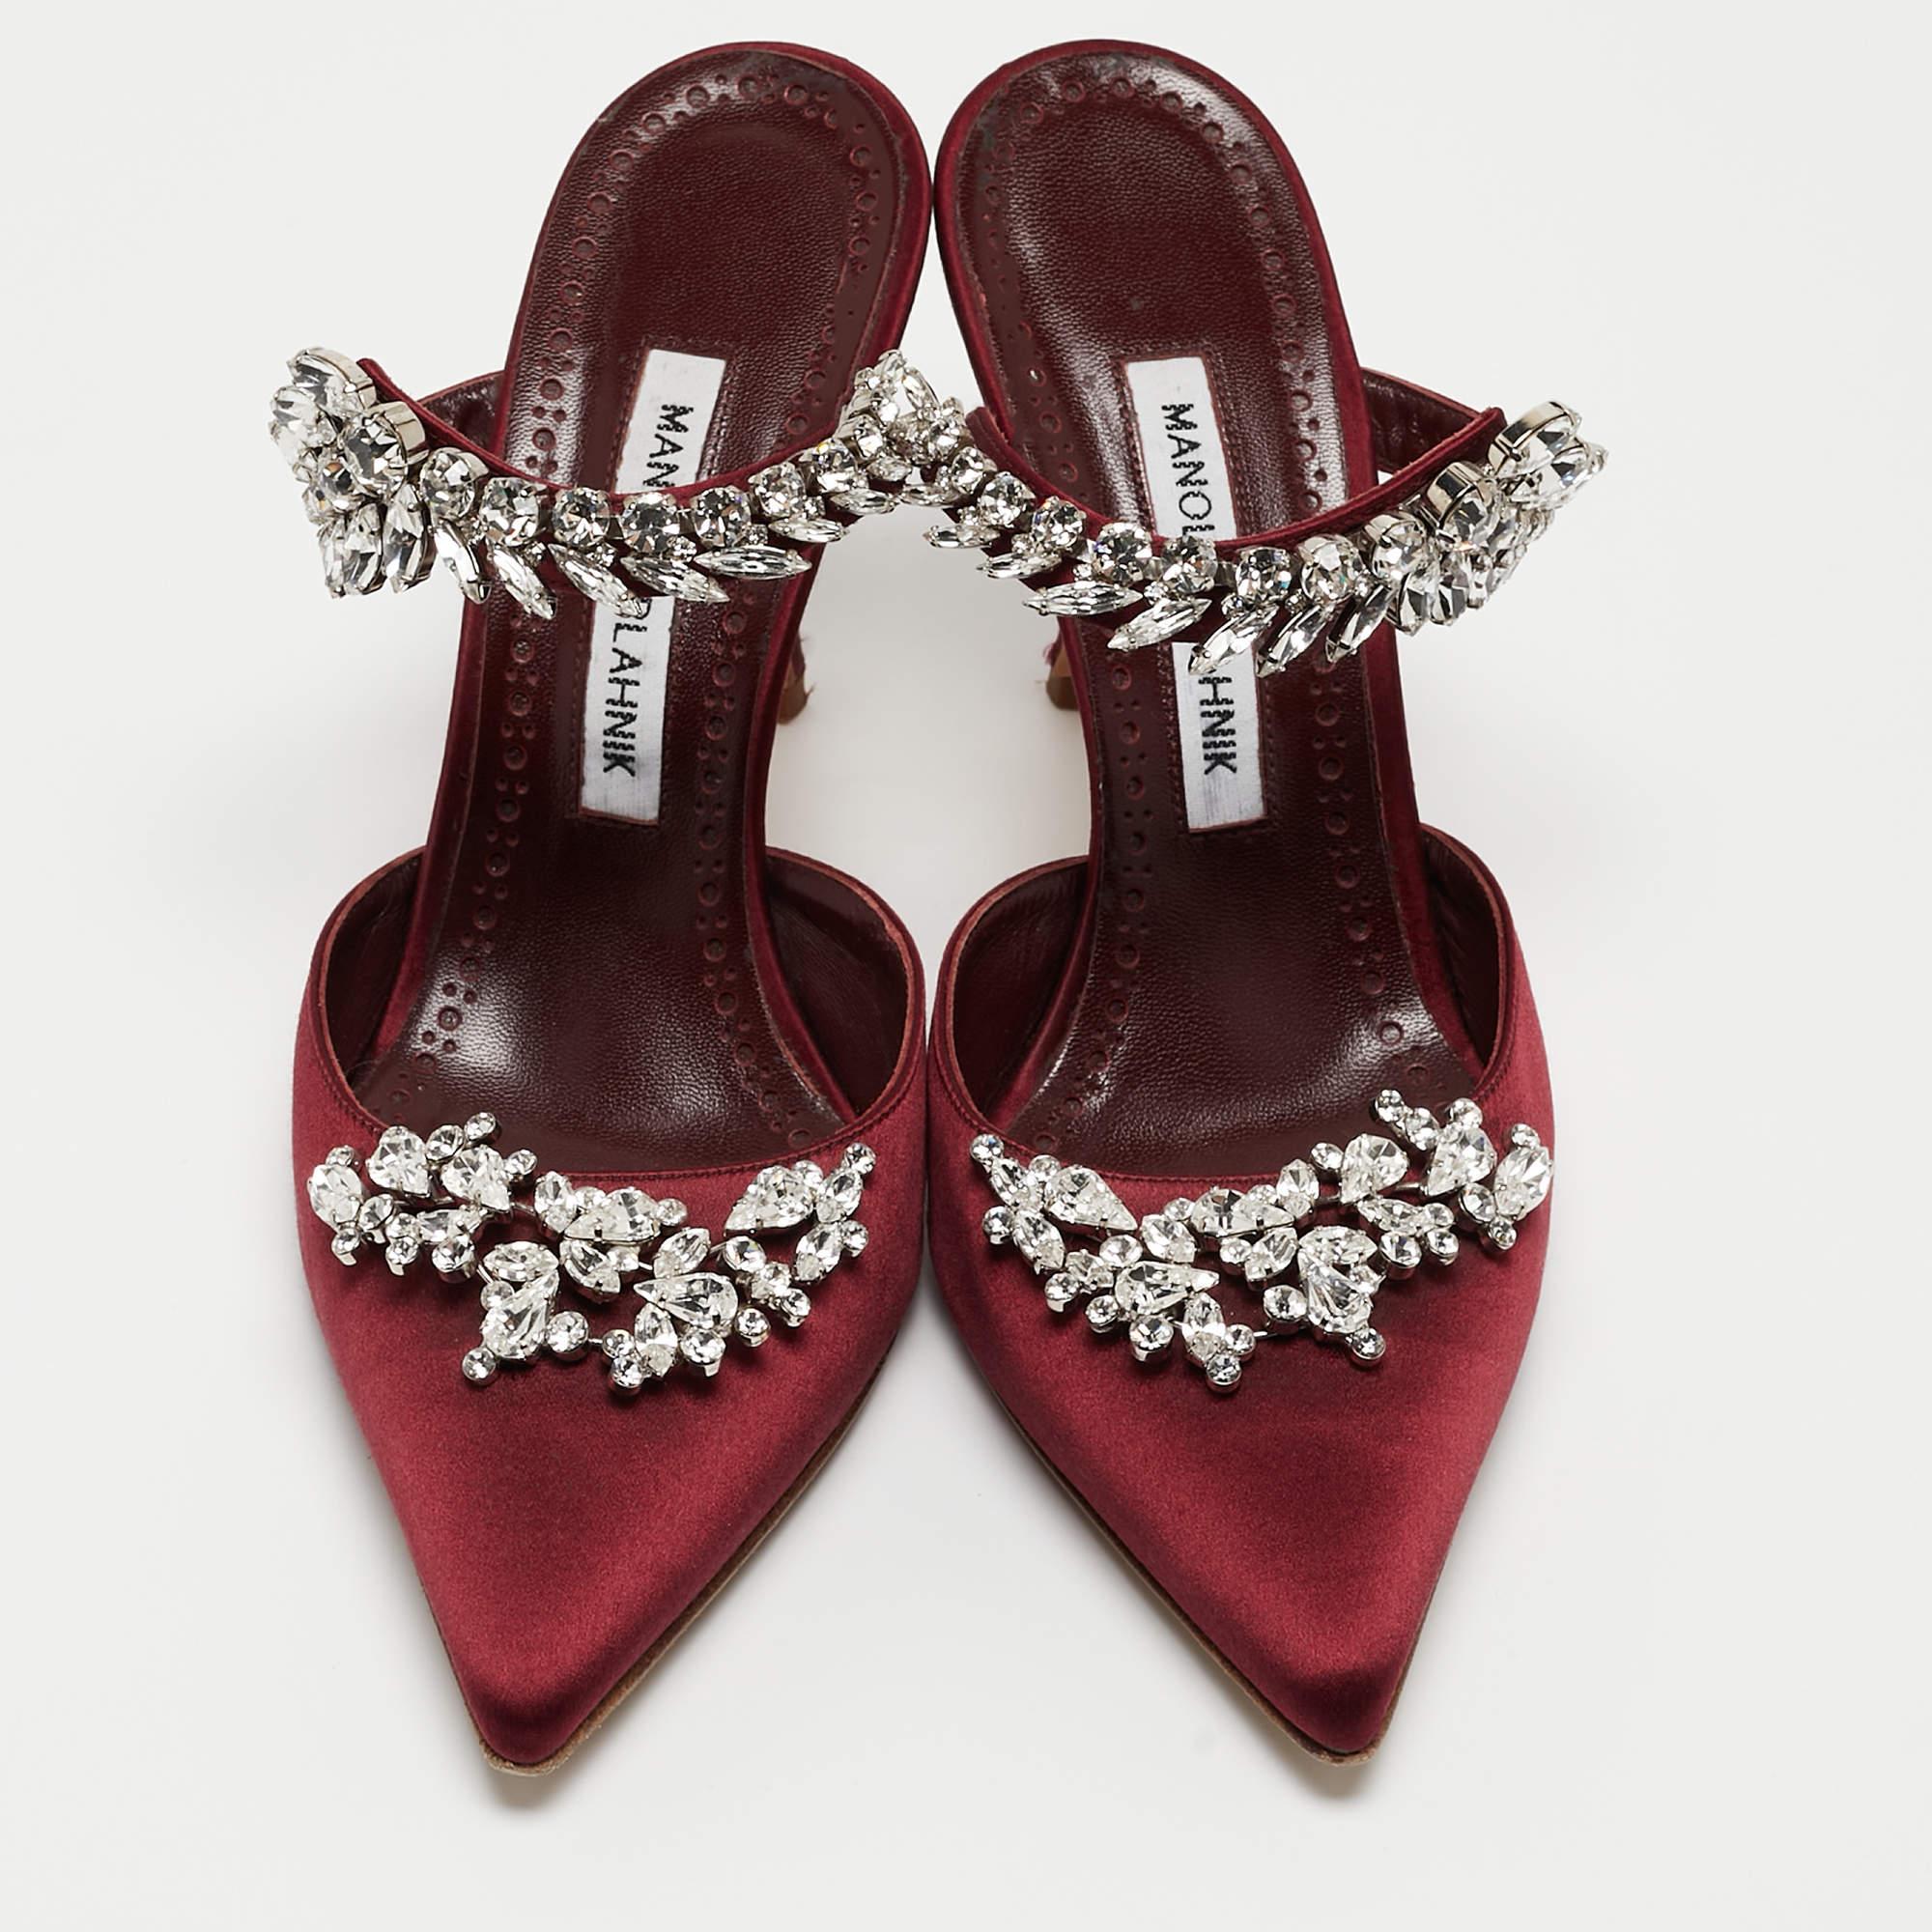 Allow this sumptuous pair of mules by Manolo Blahnik to blow your look. Crafted with satin, they are adorned with eye-catching crystal embellishments and profile adorable pointed toes. The leather-lined insoles carry brand labeling. This pair is